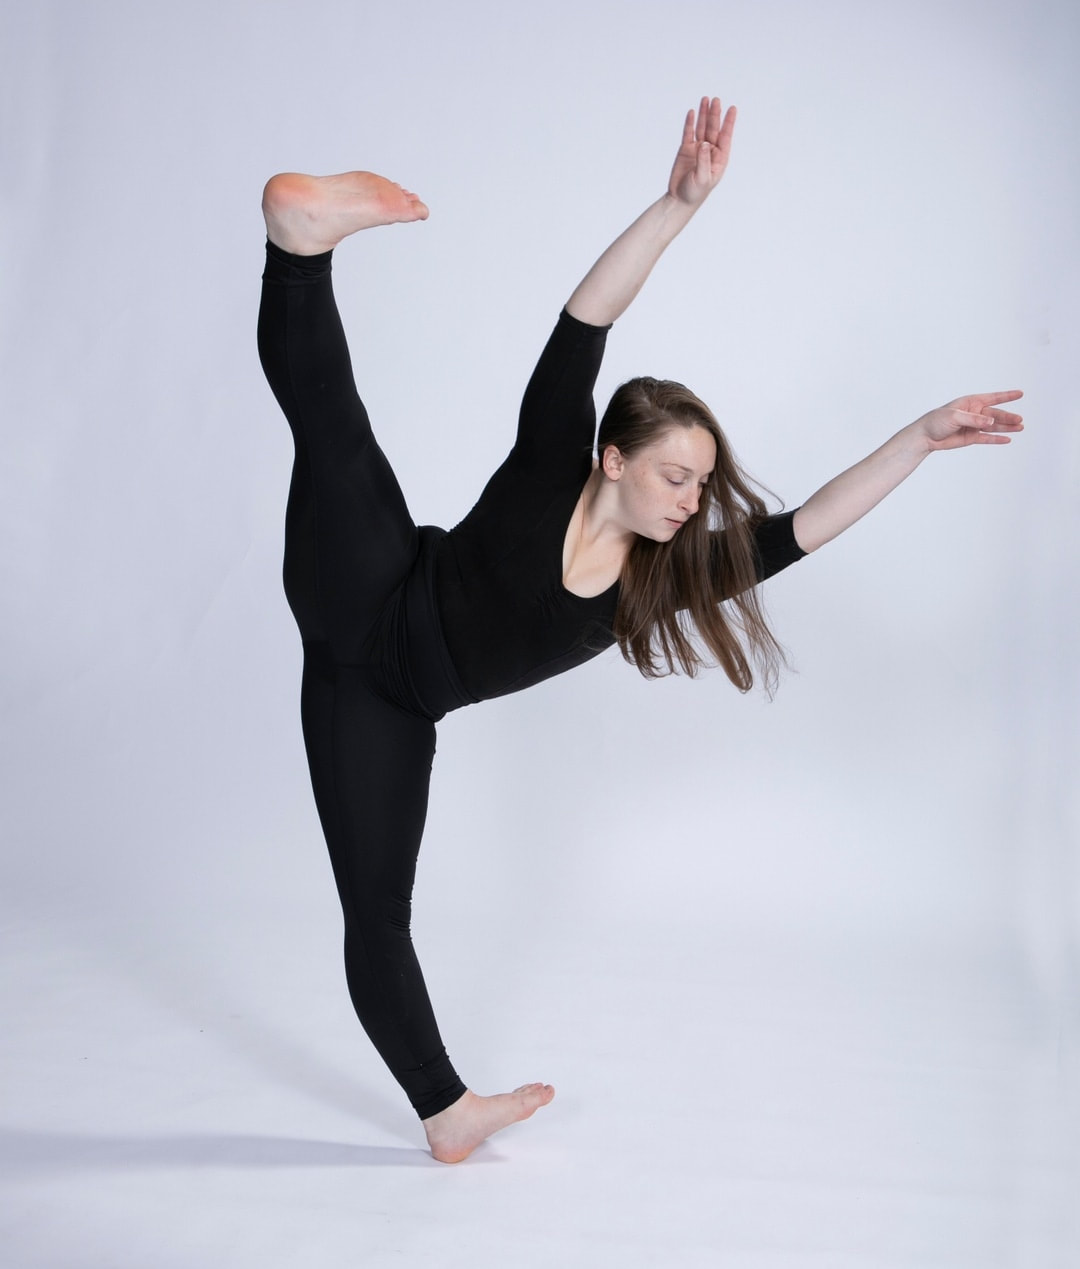 Woman with a long sleeve and full pant leotard stands on her left heel with her right leg extended